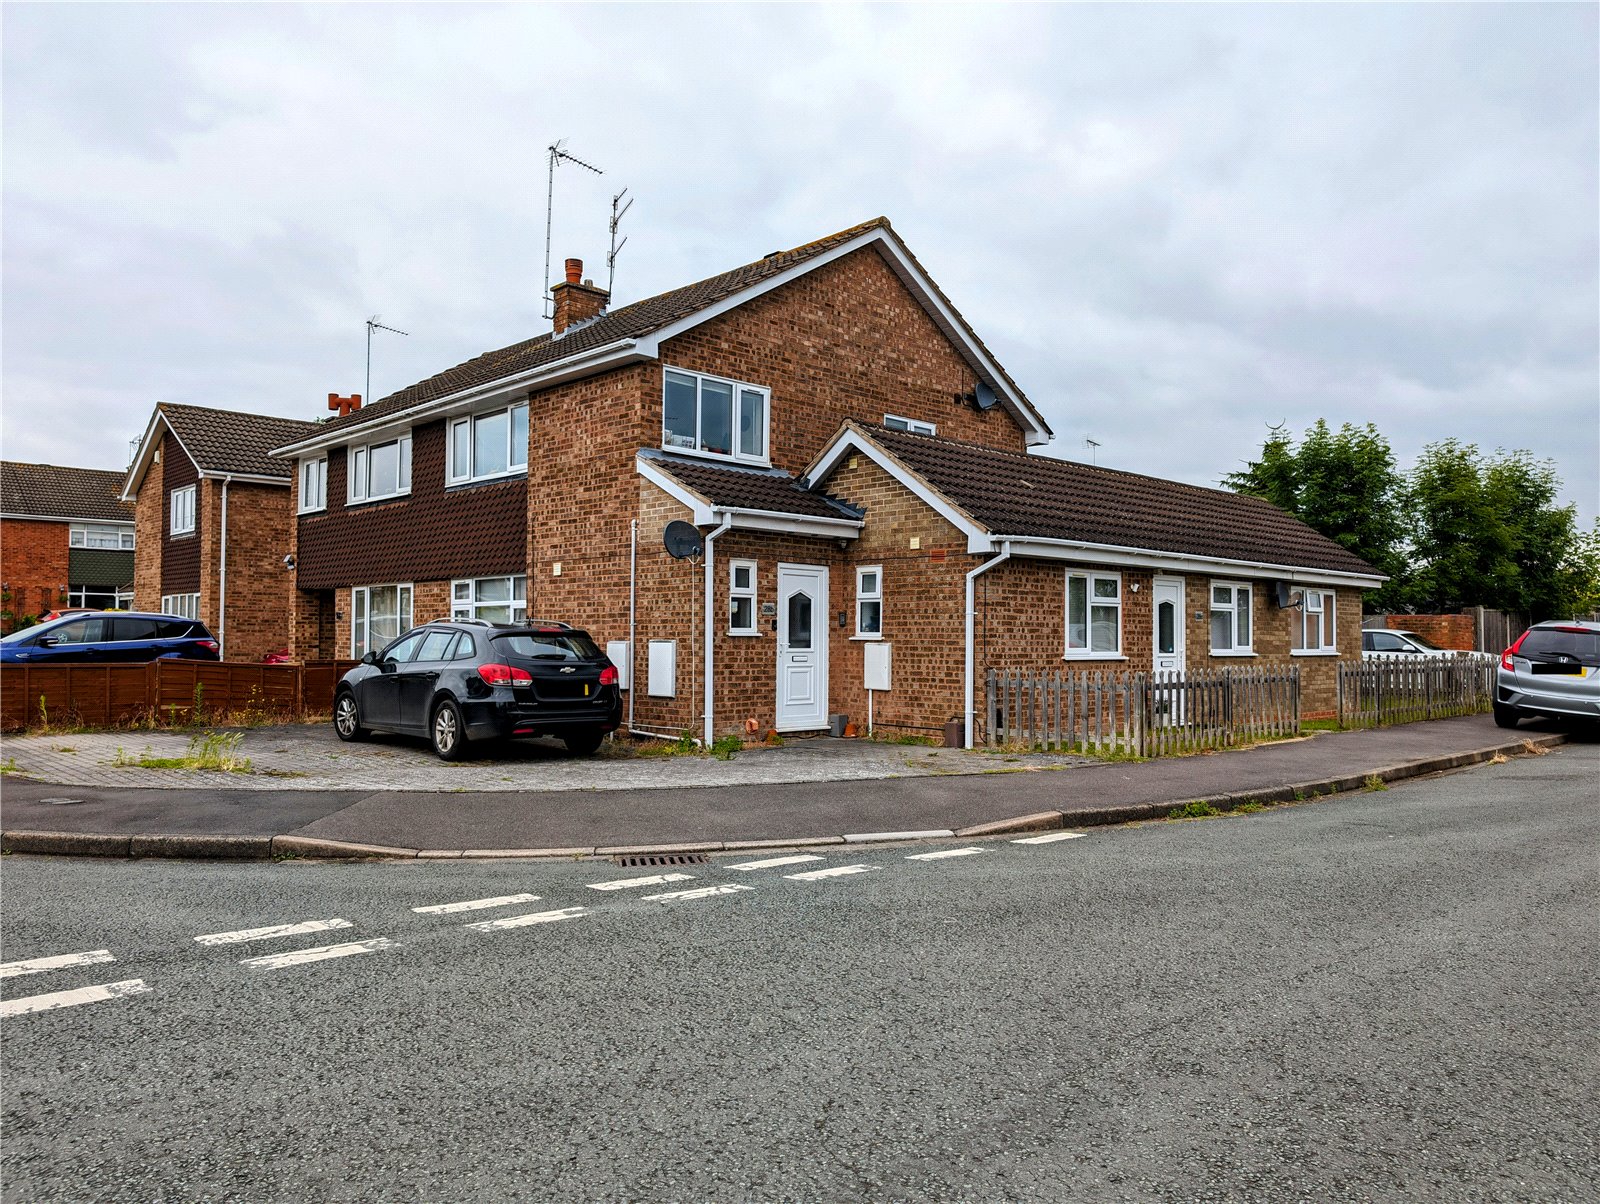 Middleton Road, Kidderminster, Worcestershire, DY11